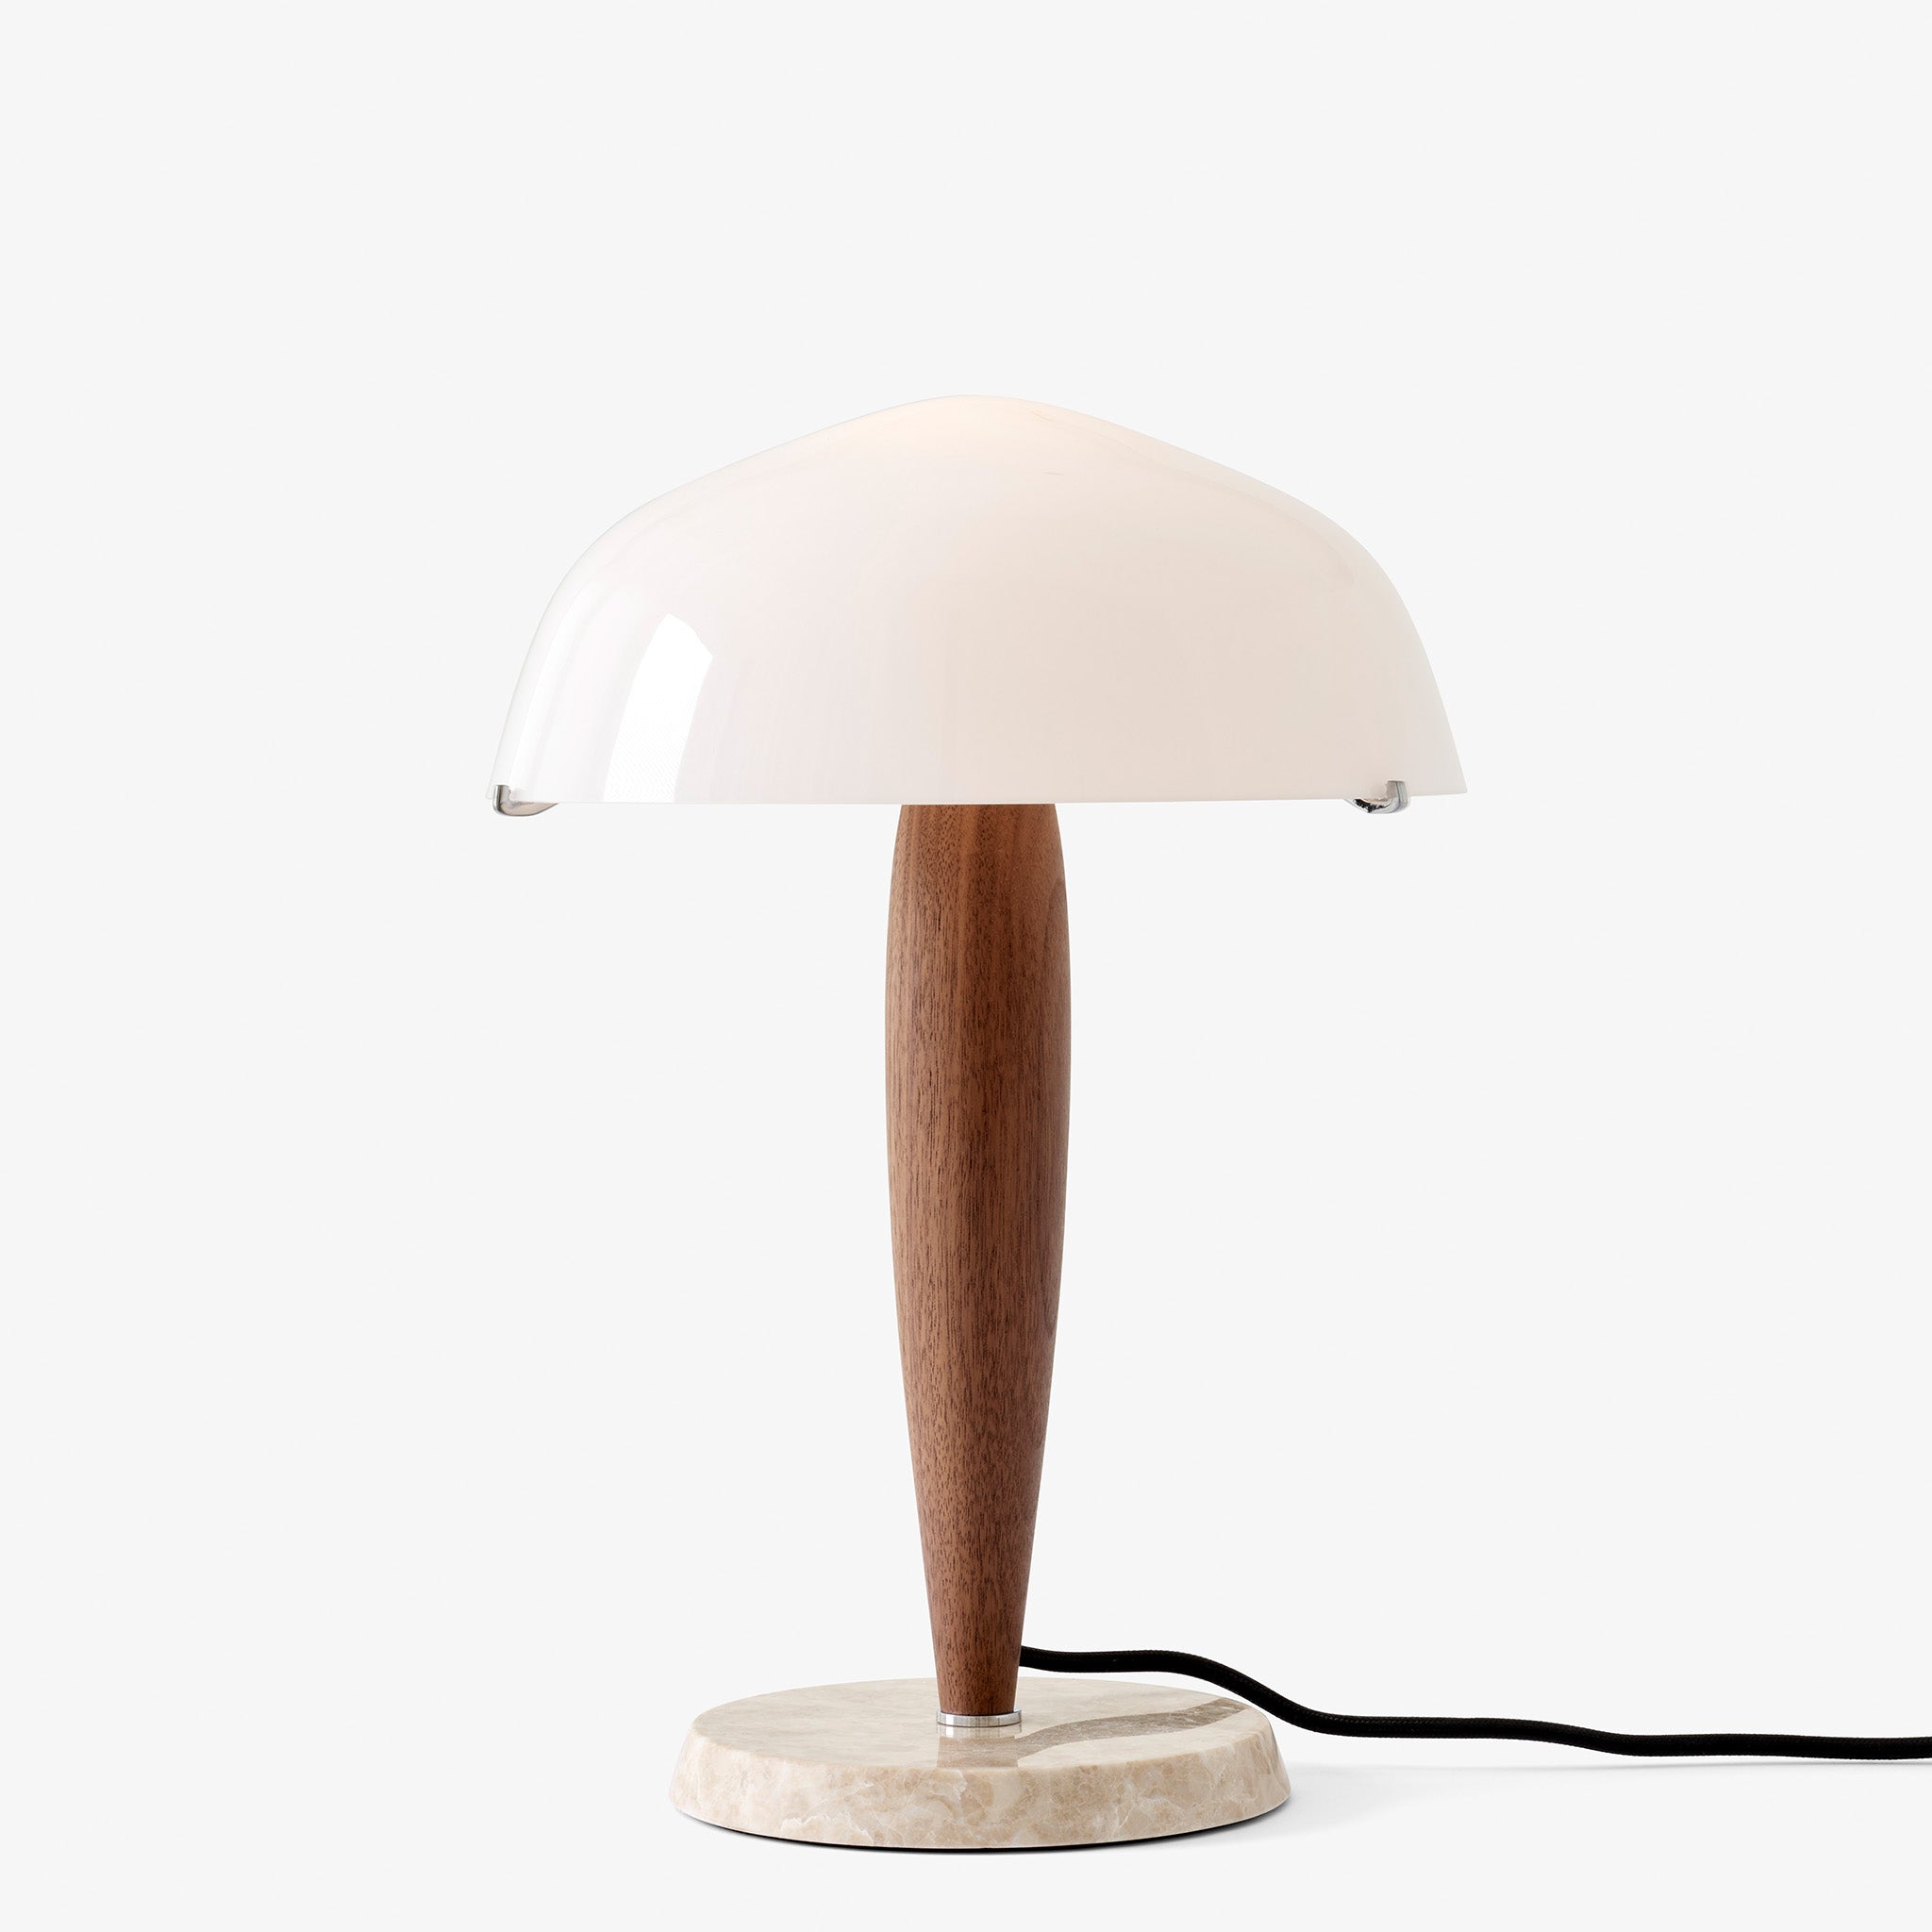 Herman SHY3 Table Lamp by Signe Hytte for &Tradition